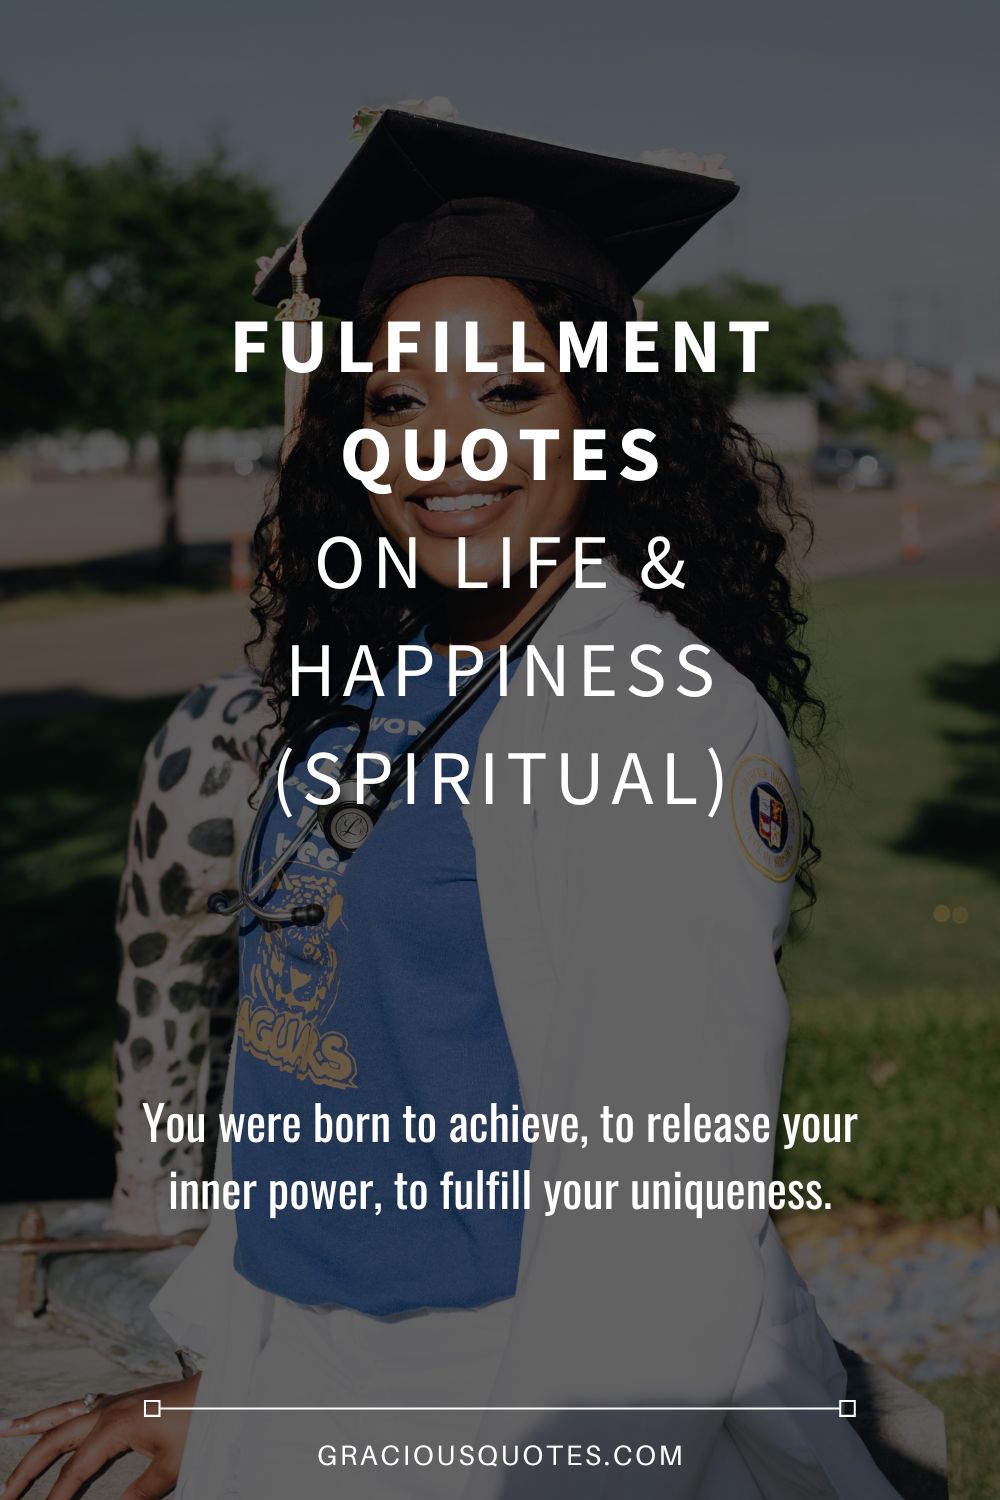 Fulfillment Quotes on Life & Happiness (SPIRITUAL) - Gracious Quotes